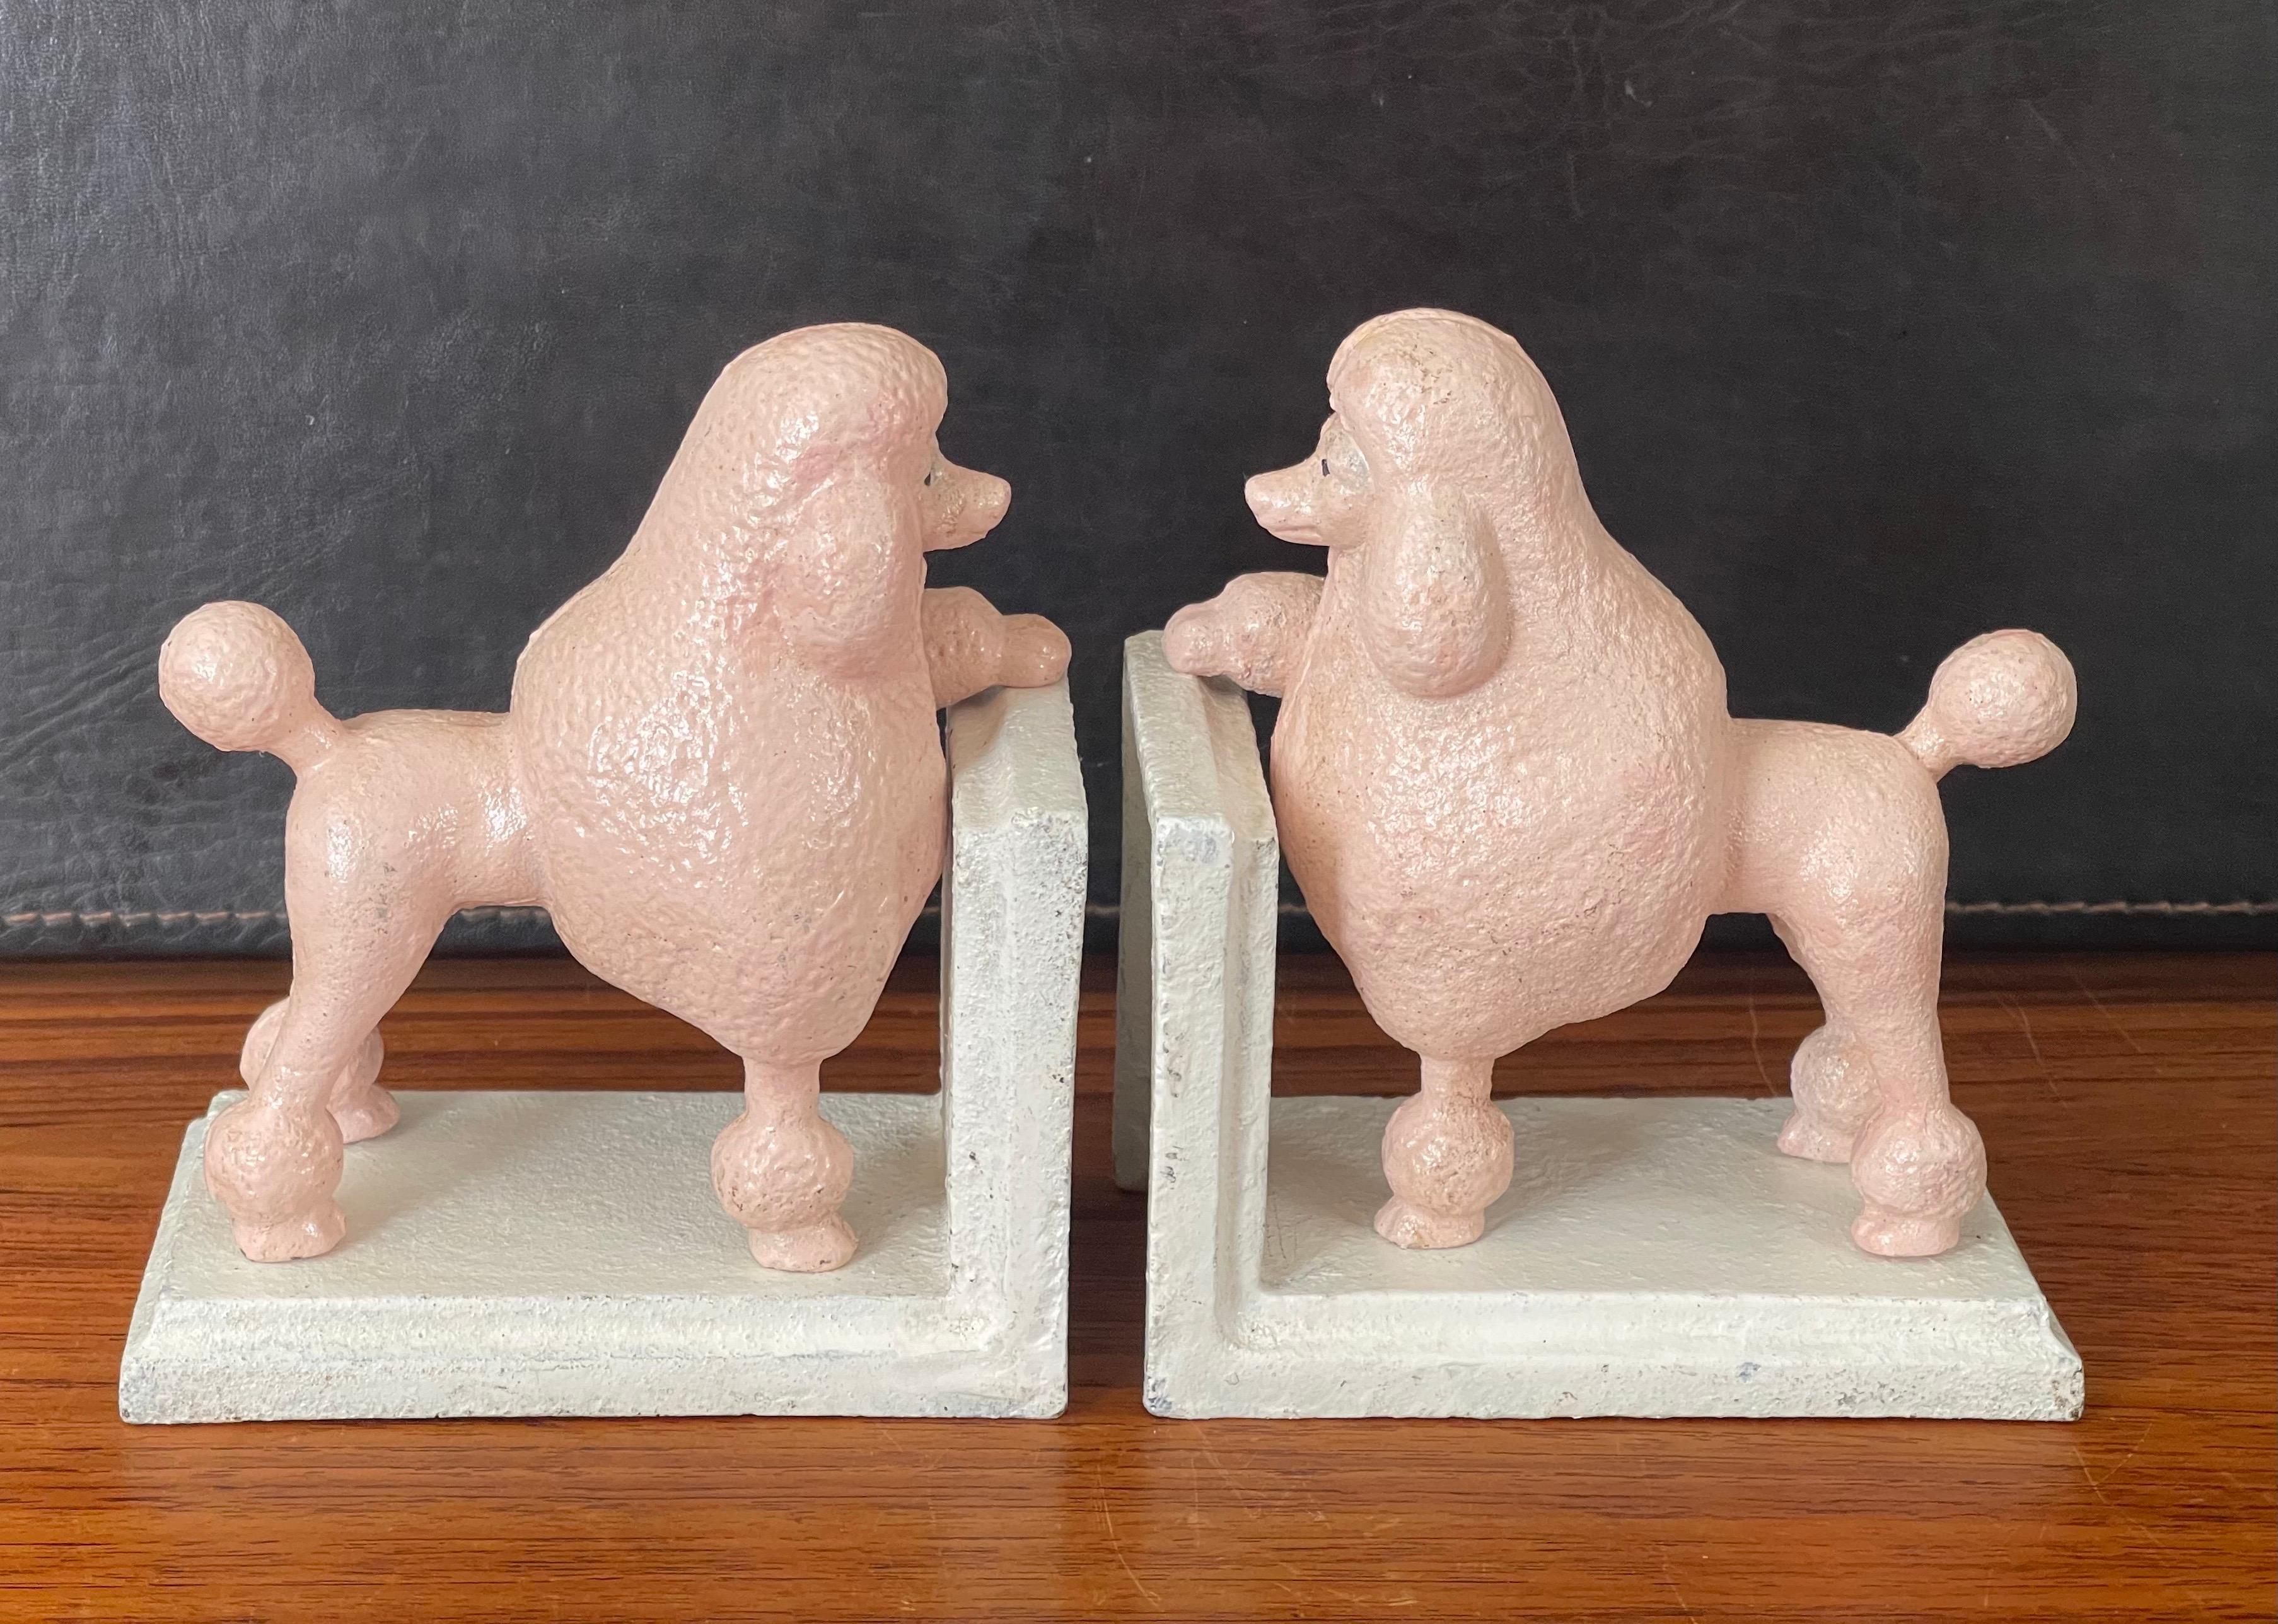 A super fun pair of vintage pink poodle cast iron bookends circa 1950s. The bookends are in fair condition with some wear and chips to the paint; they measure 10.5